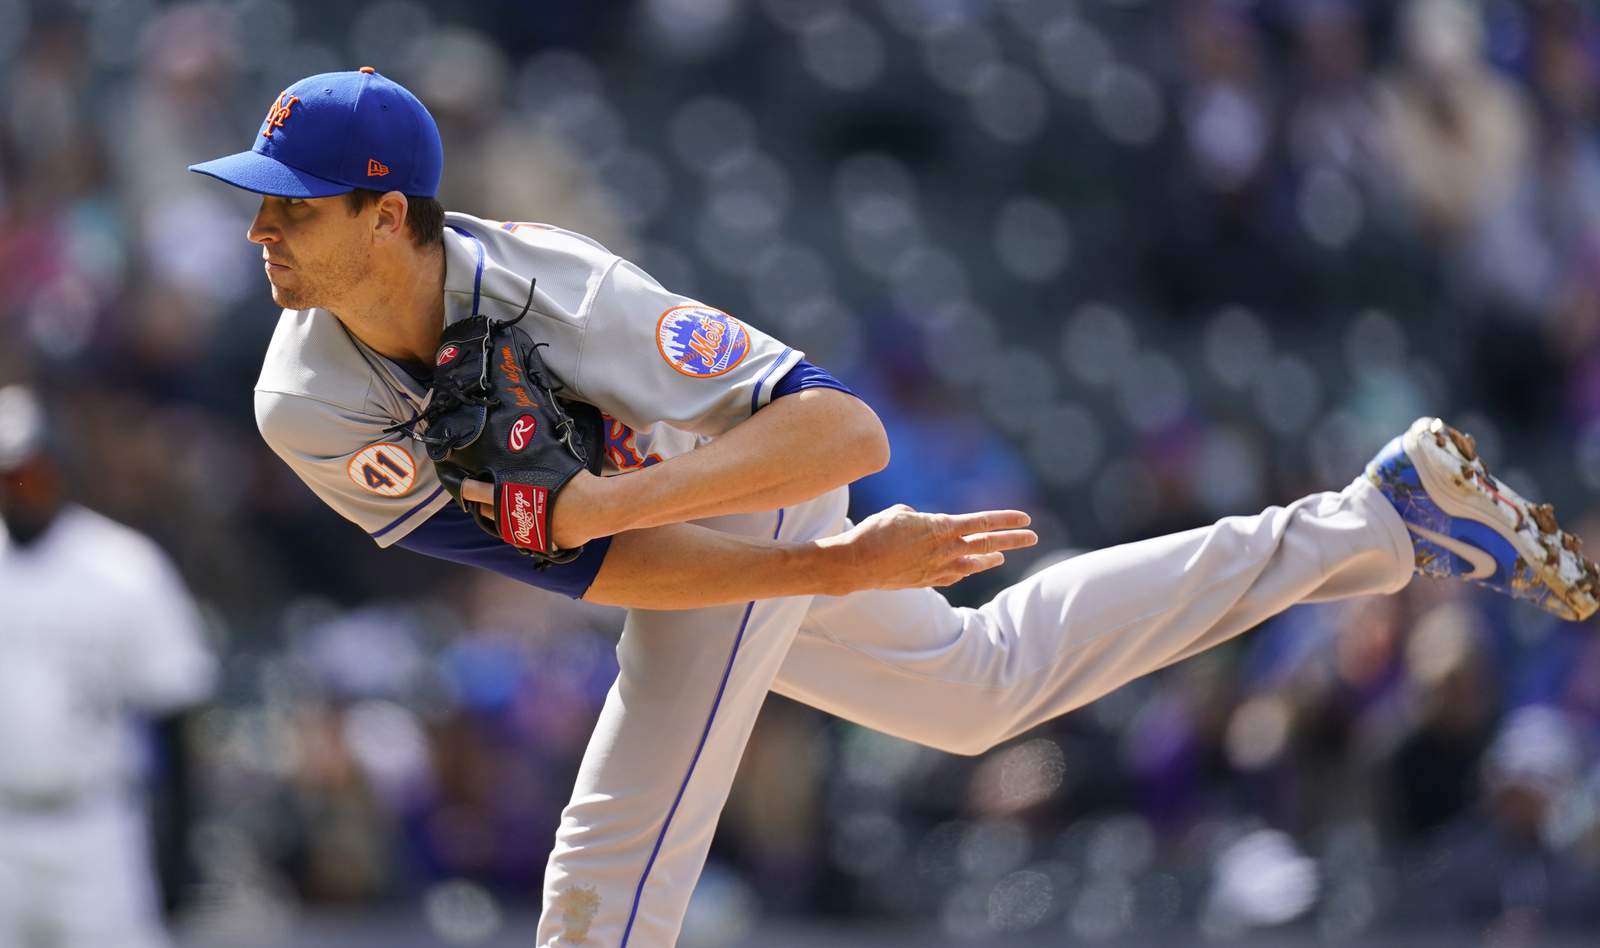 Mets' deGrom strikes out 9 in row, 1 shy of Seaver's record